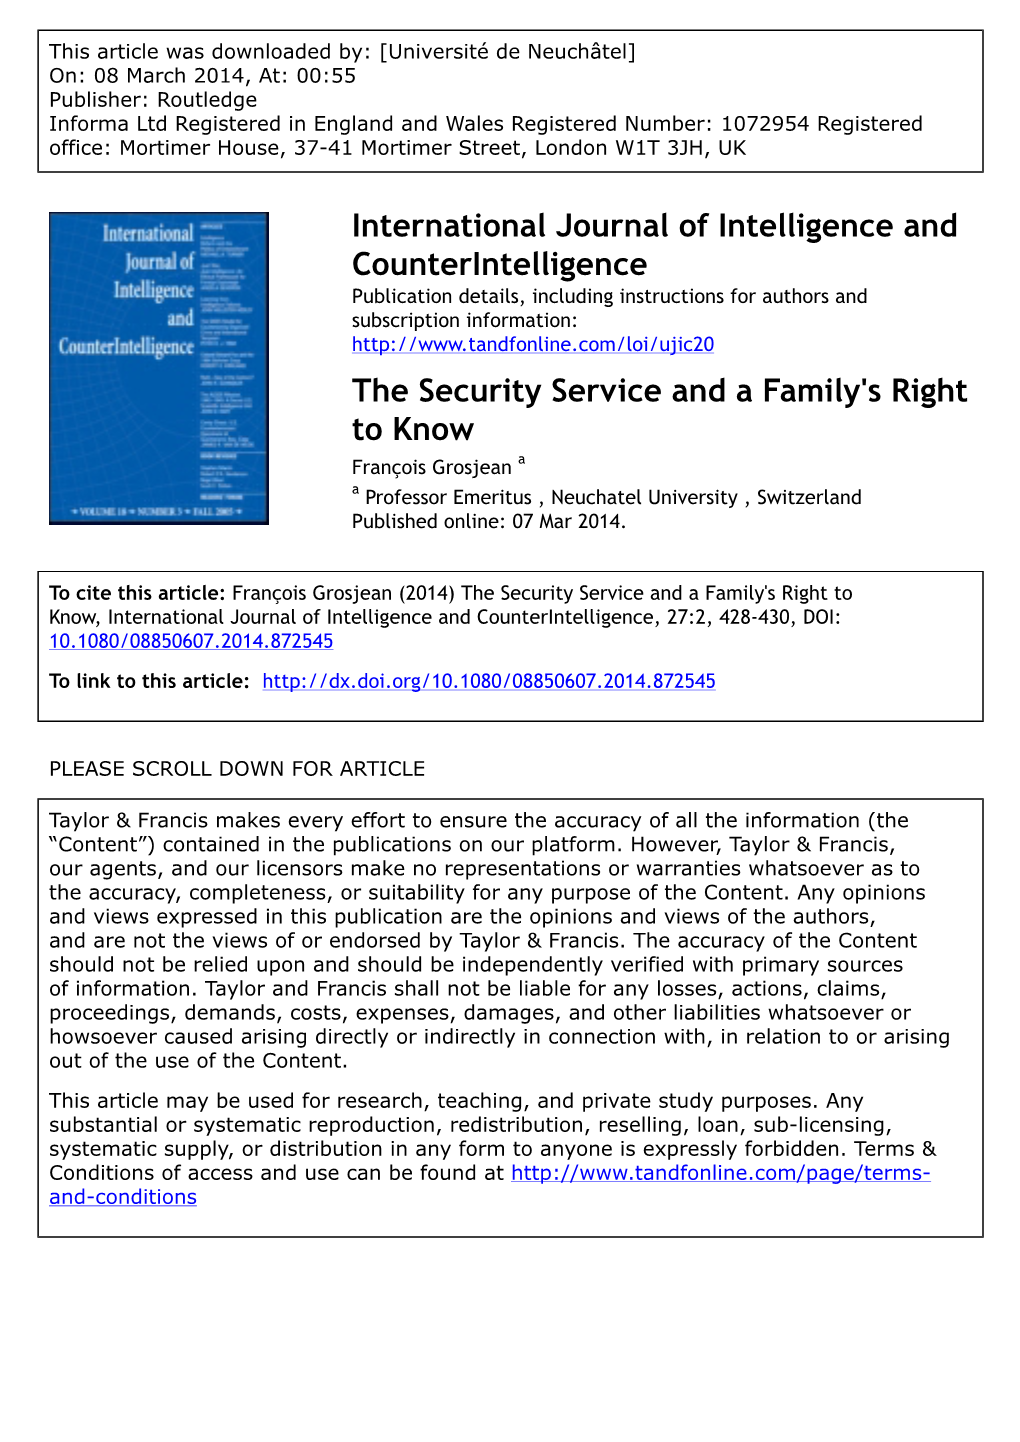 The Security Service and a Family's Right to Know François Grosjean a a Professor Emeritus , Neuchatel University , Switzerland Published Online: 07 Mar 2014